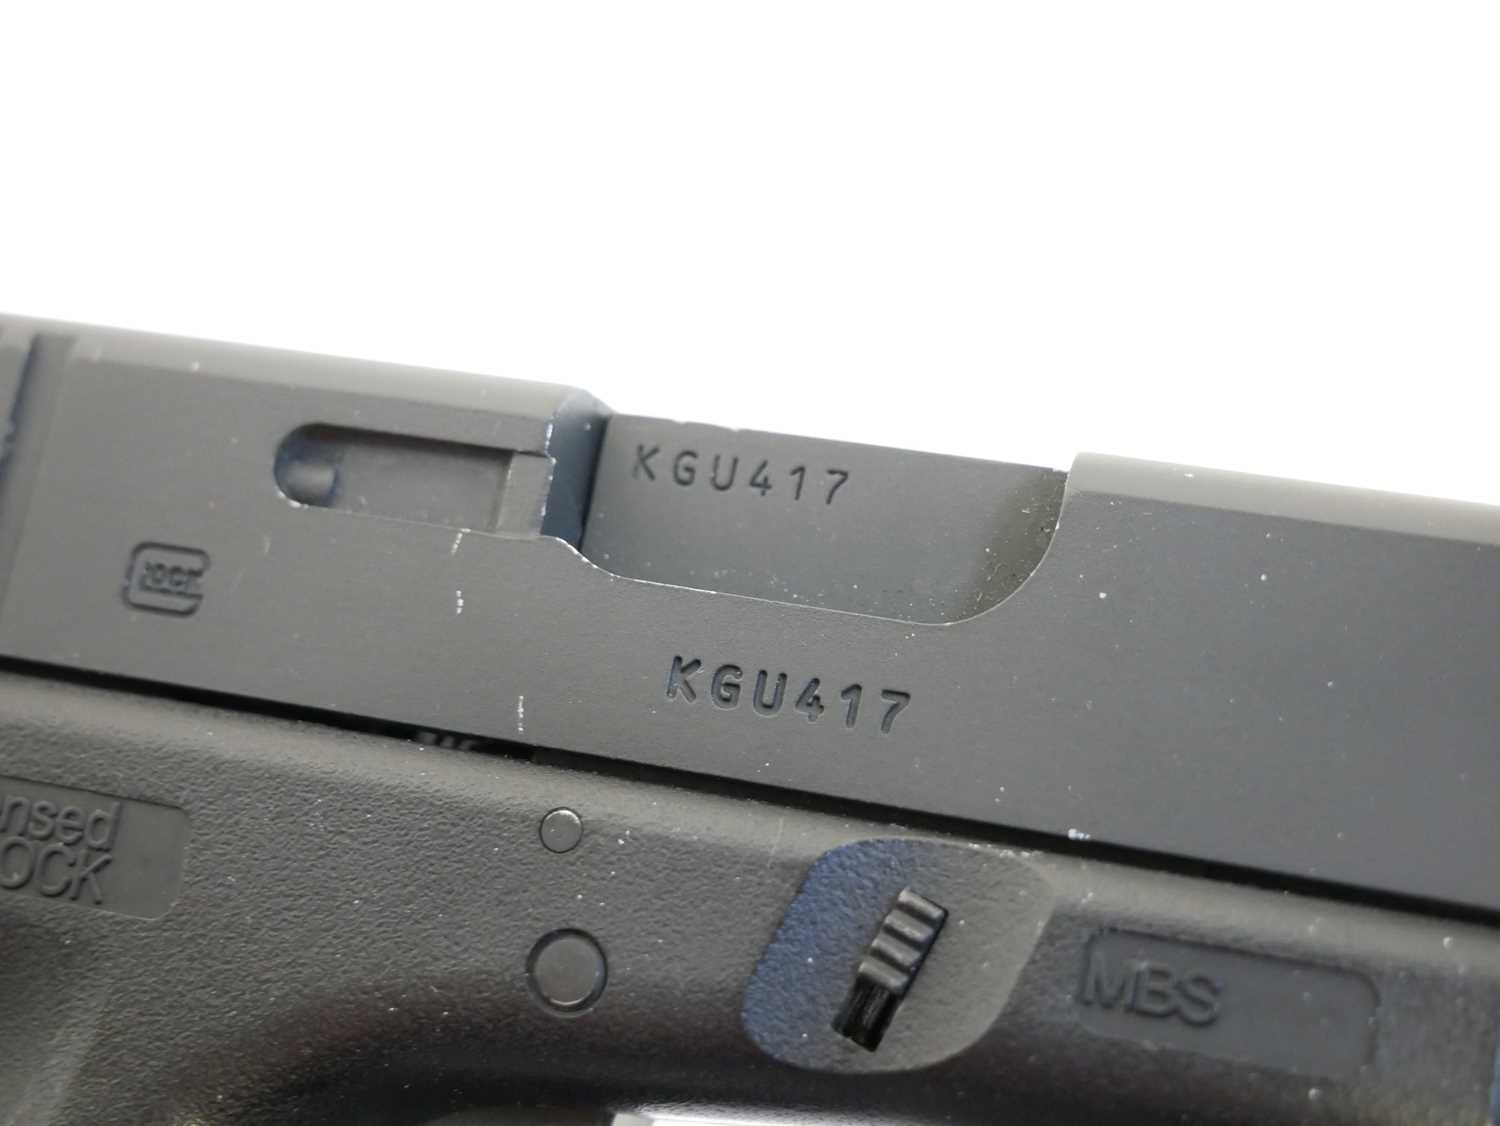 Umarex Glock 17 generation 4 .177 BB CO2 air pistol, serial number KGU417, with box and one - Image 2 of 8